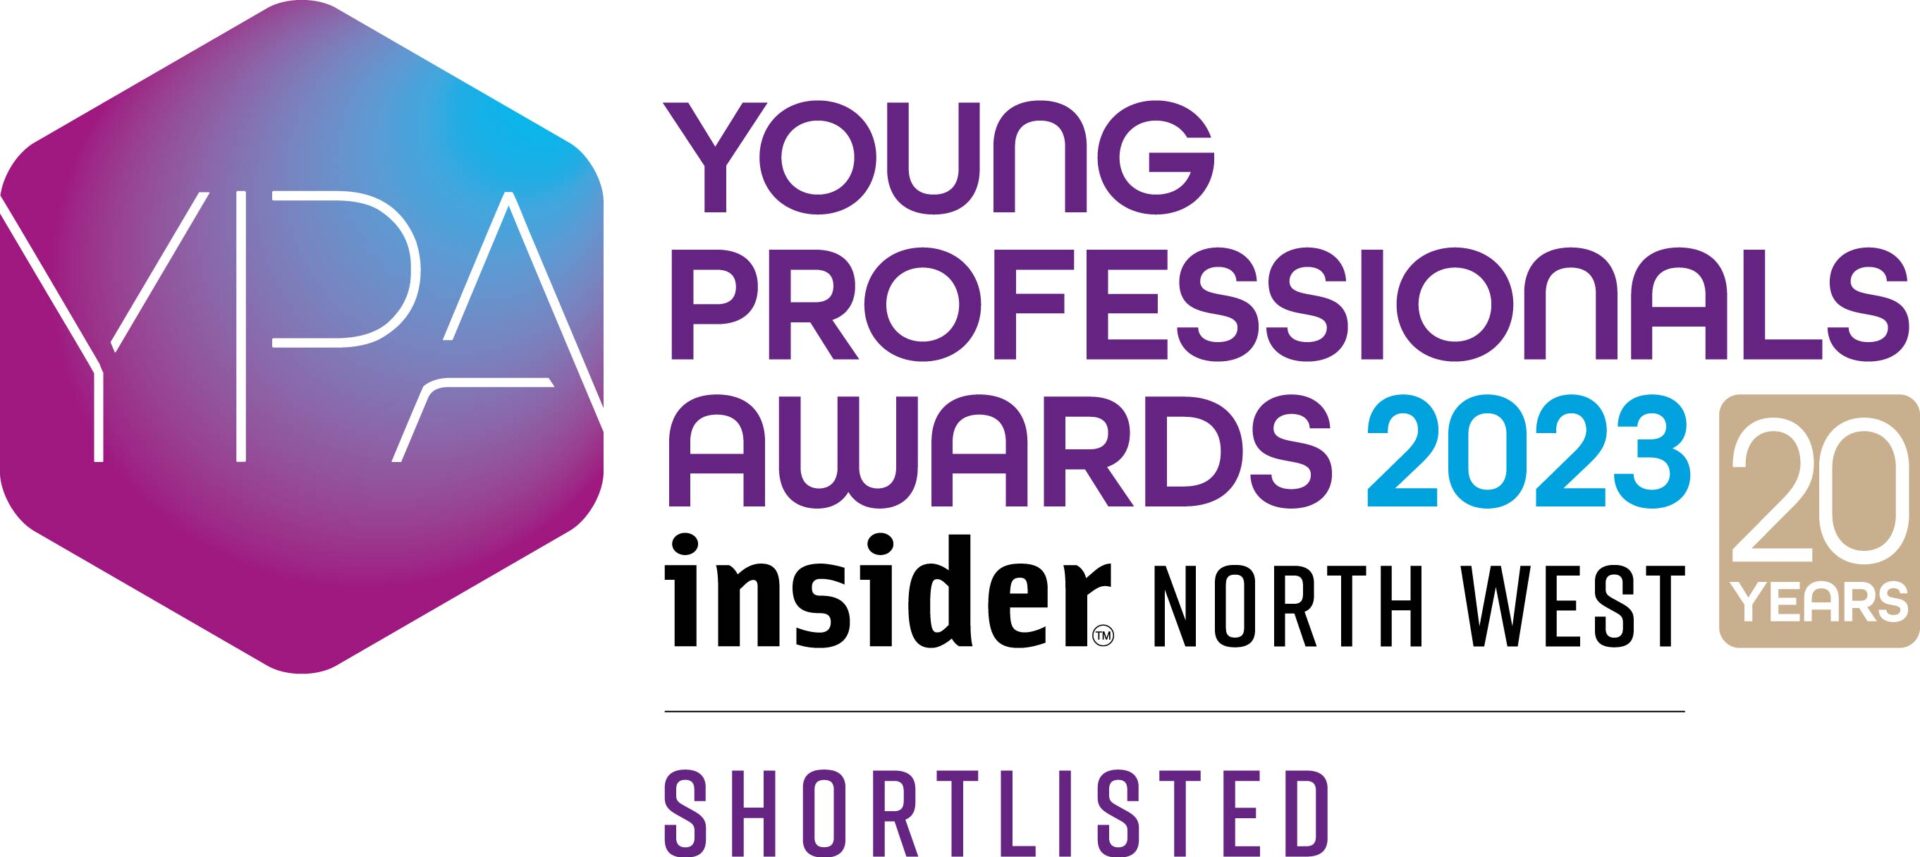 Young Professionals Awards North West shortlisted 2023  1920x857 1